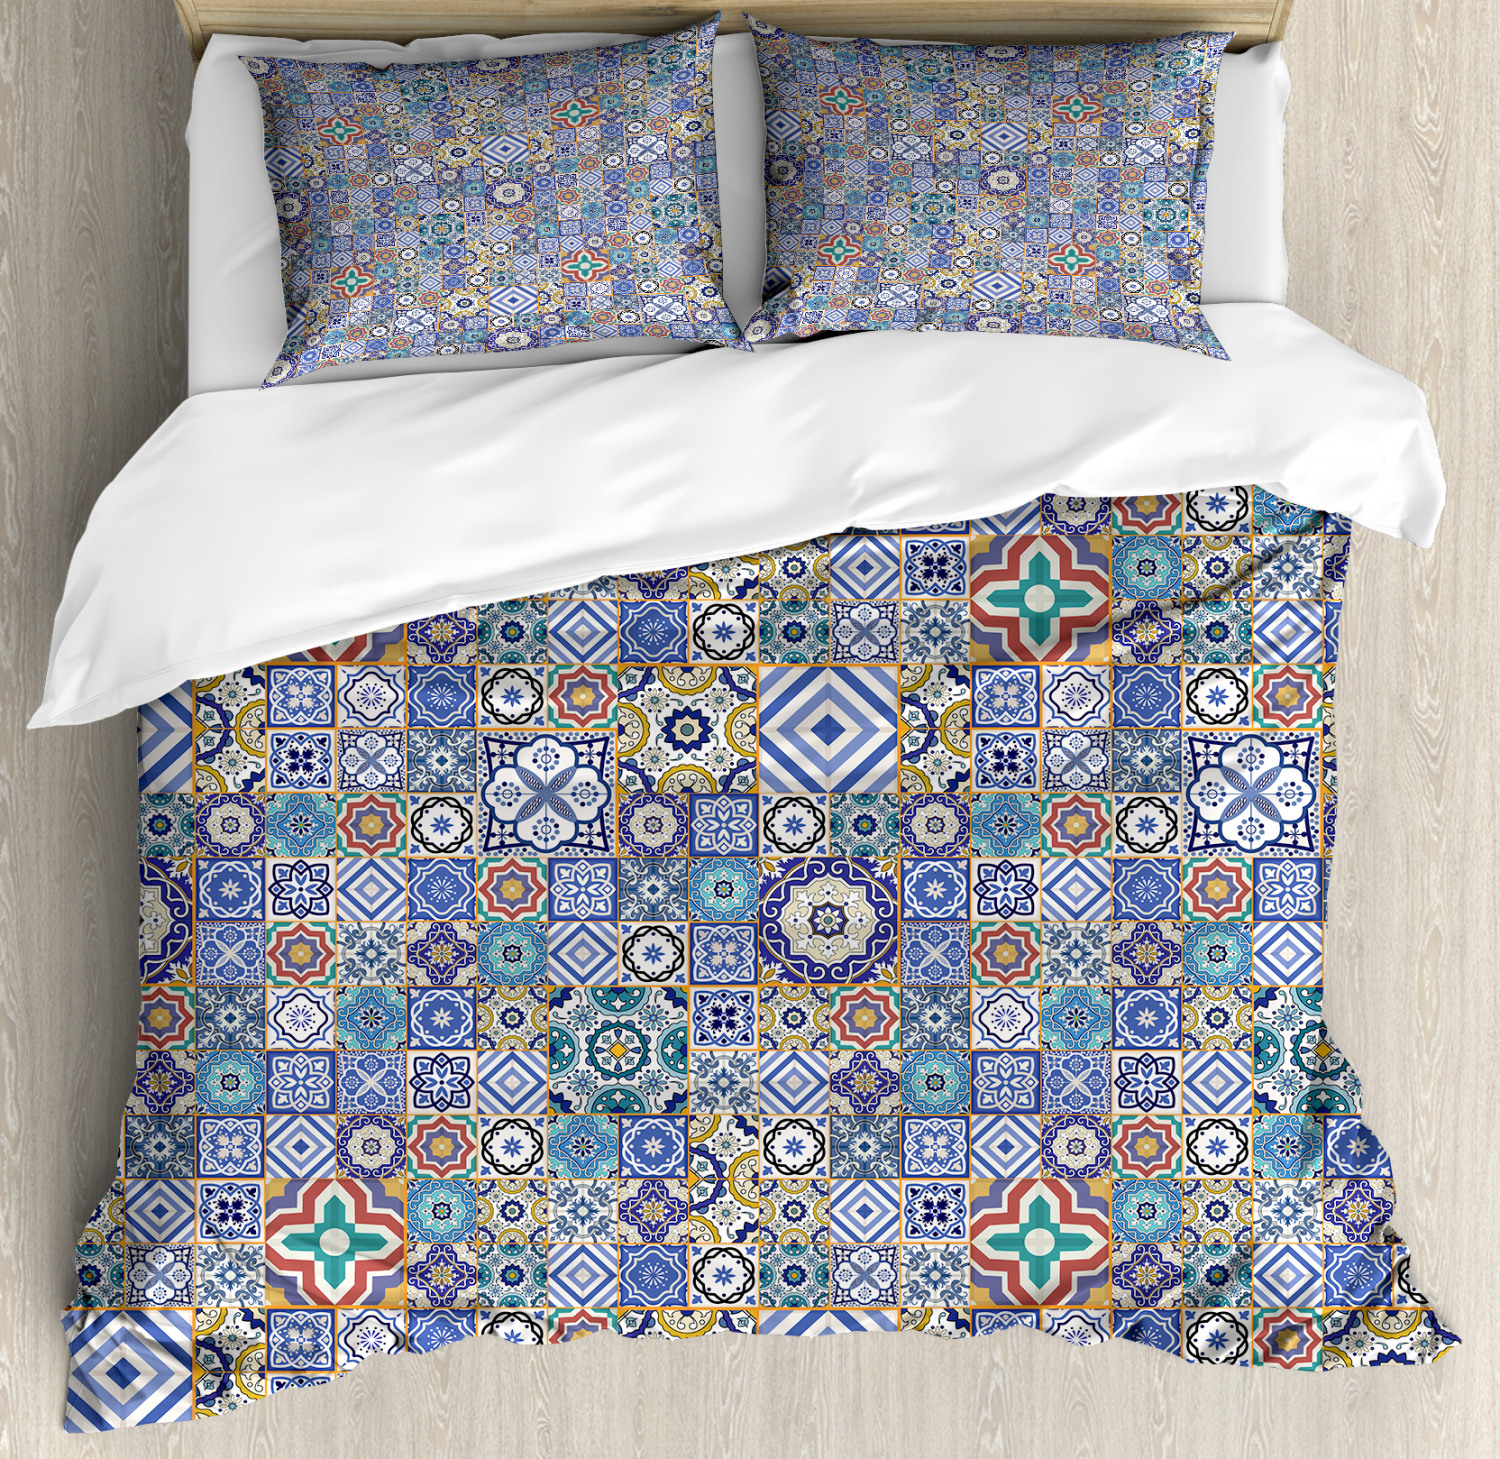 Moroccan Duvet Cover Set With Pillow Shams Grid Squares Pattern